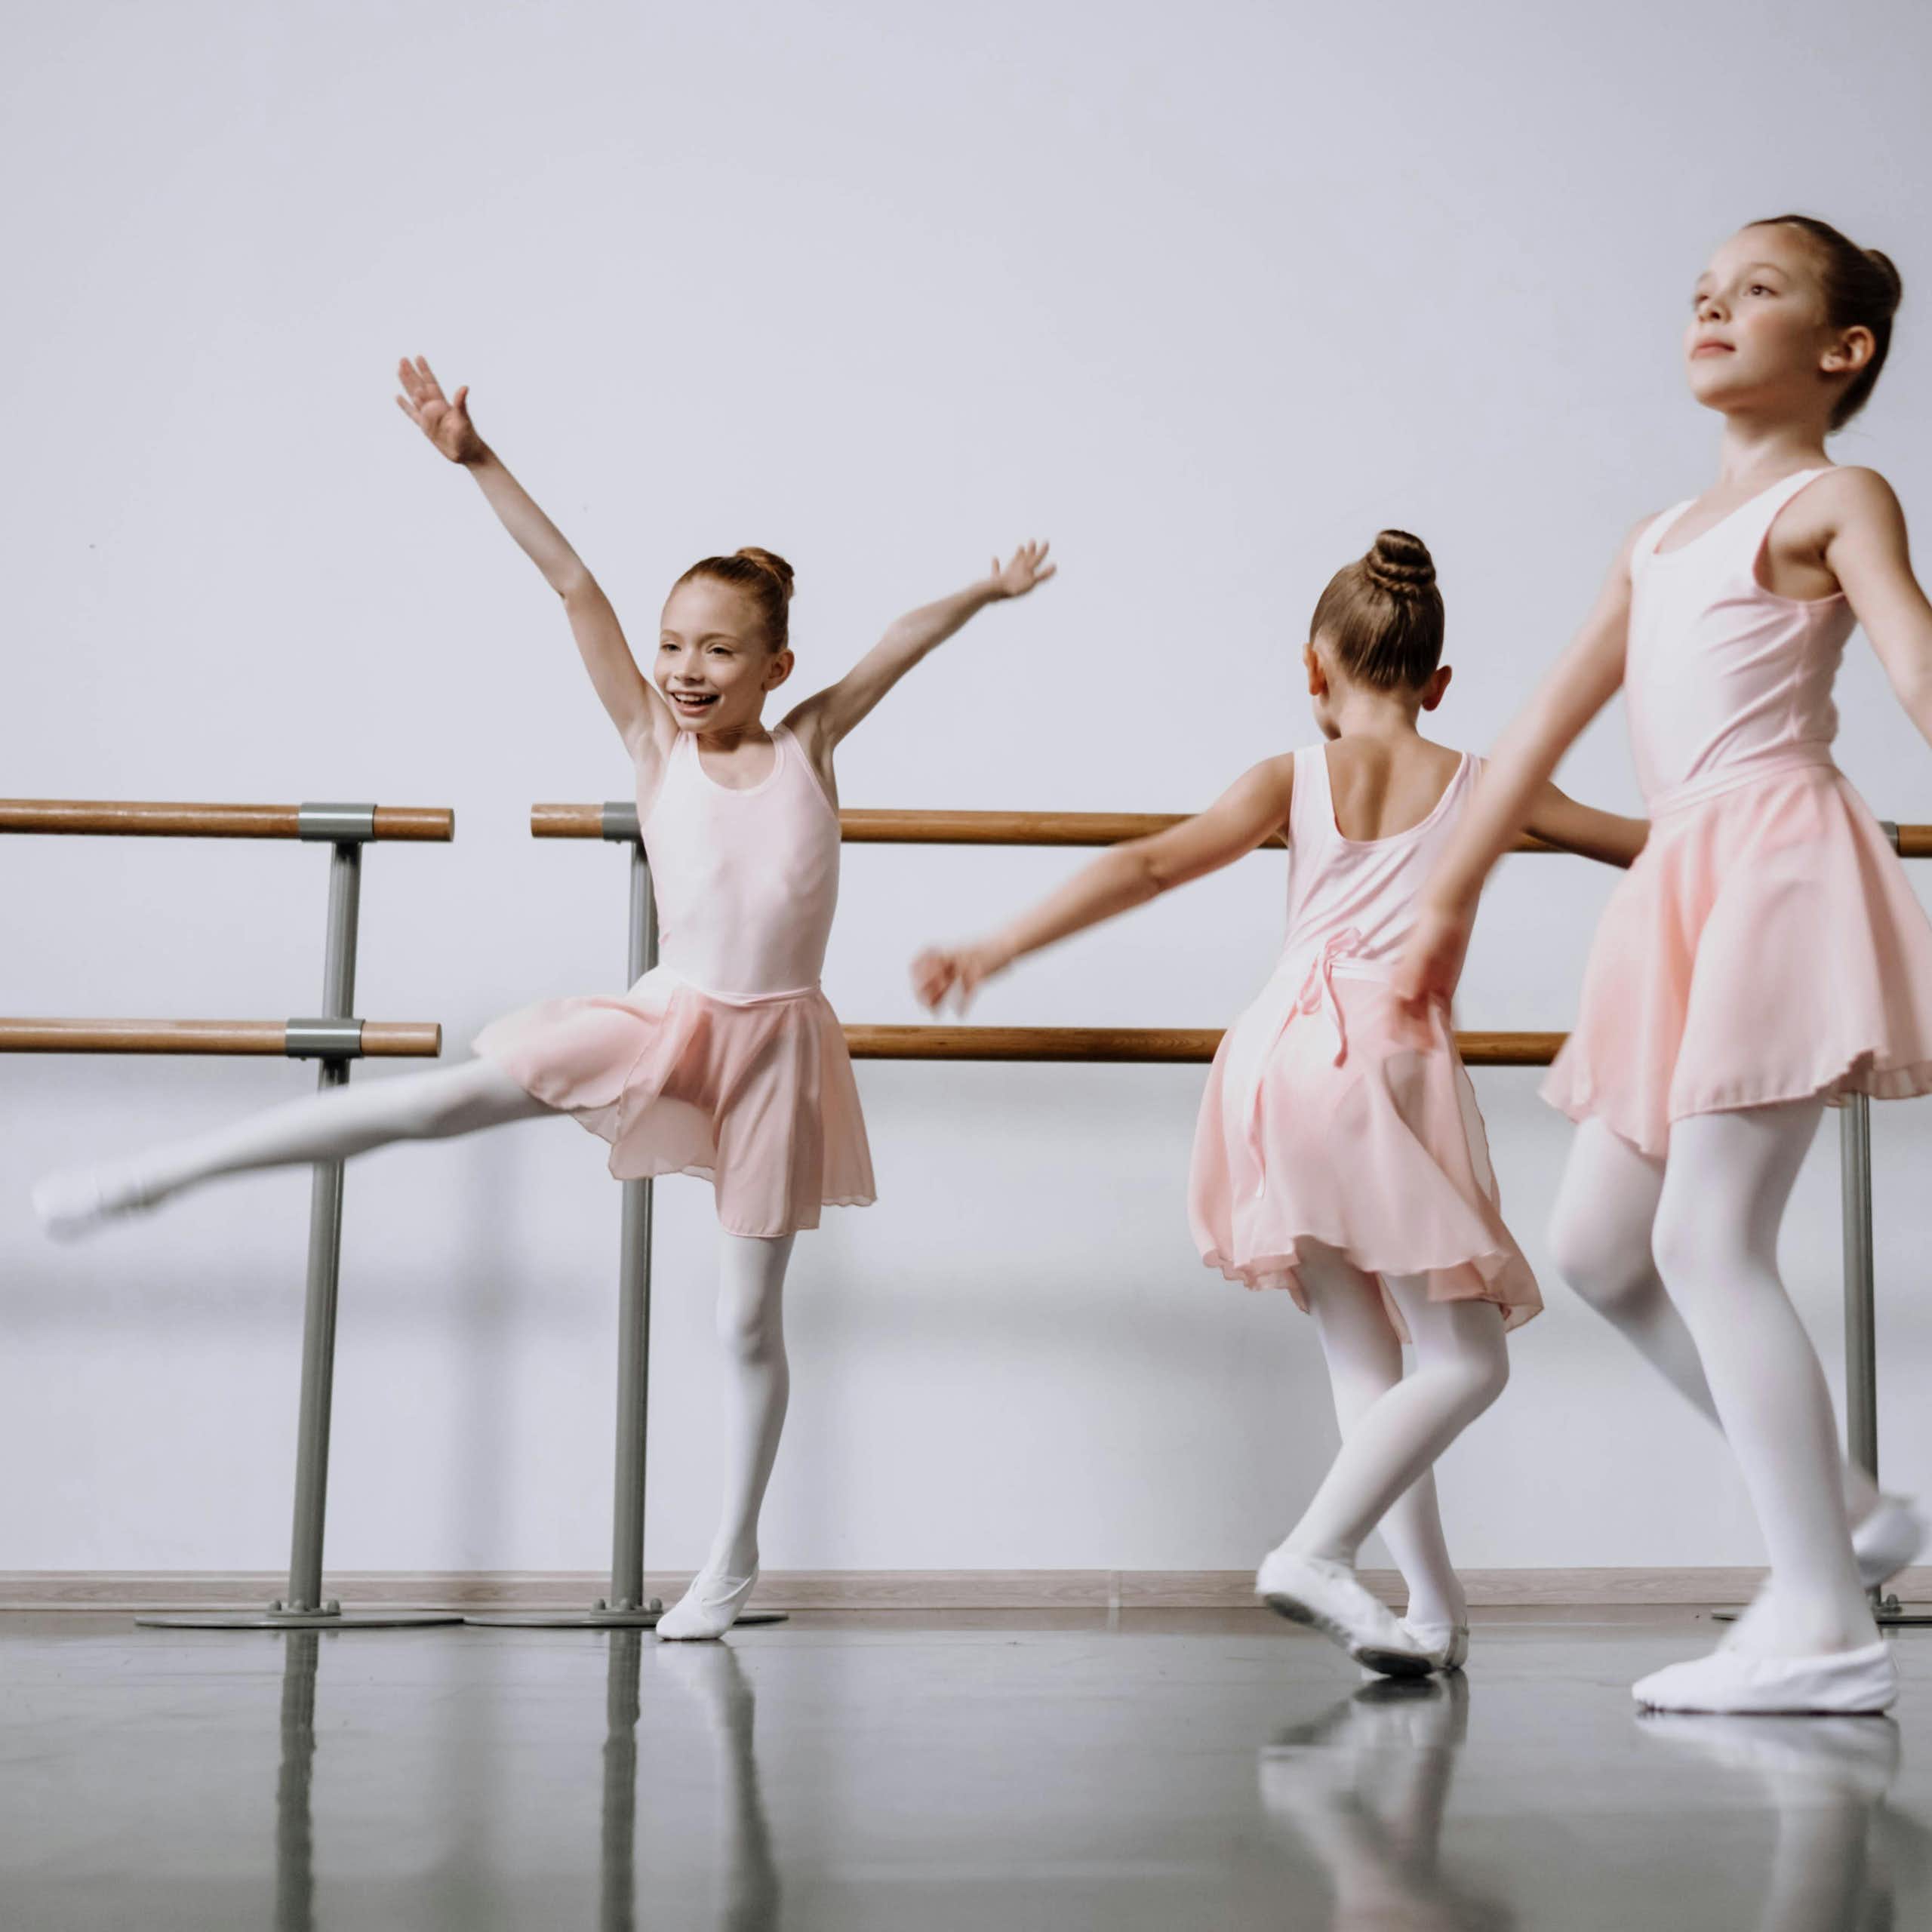 Three young girls in ballet costumes dance next to a barre.